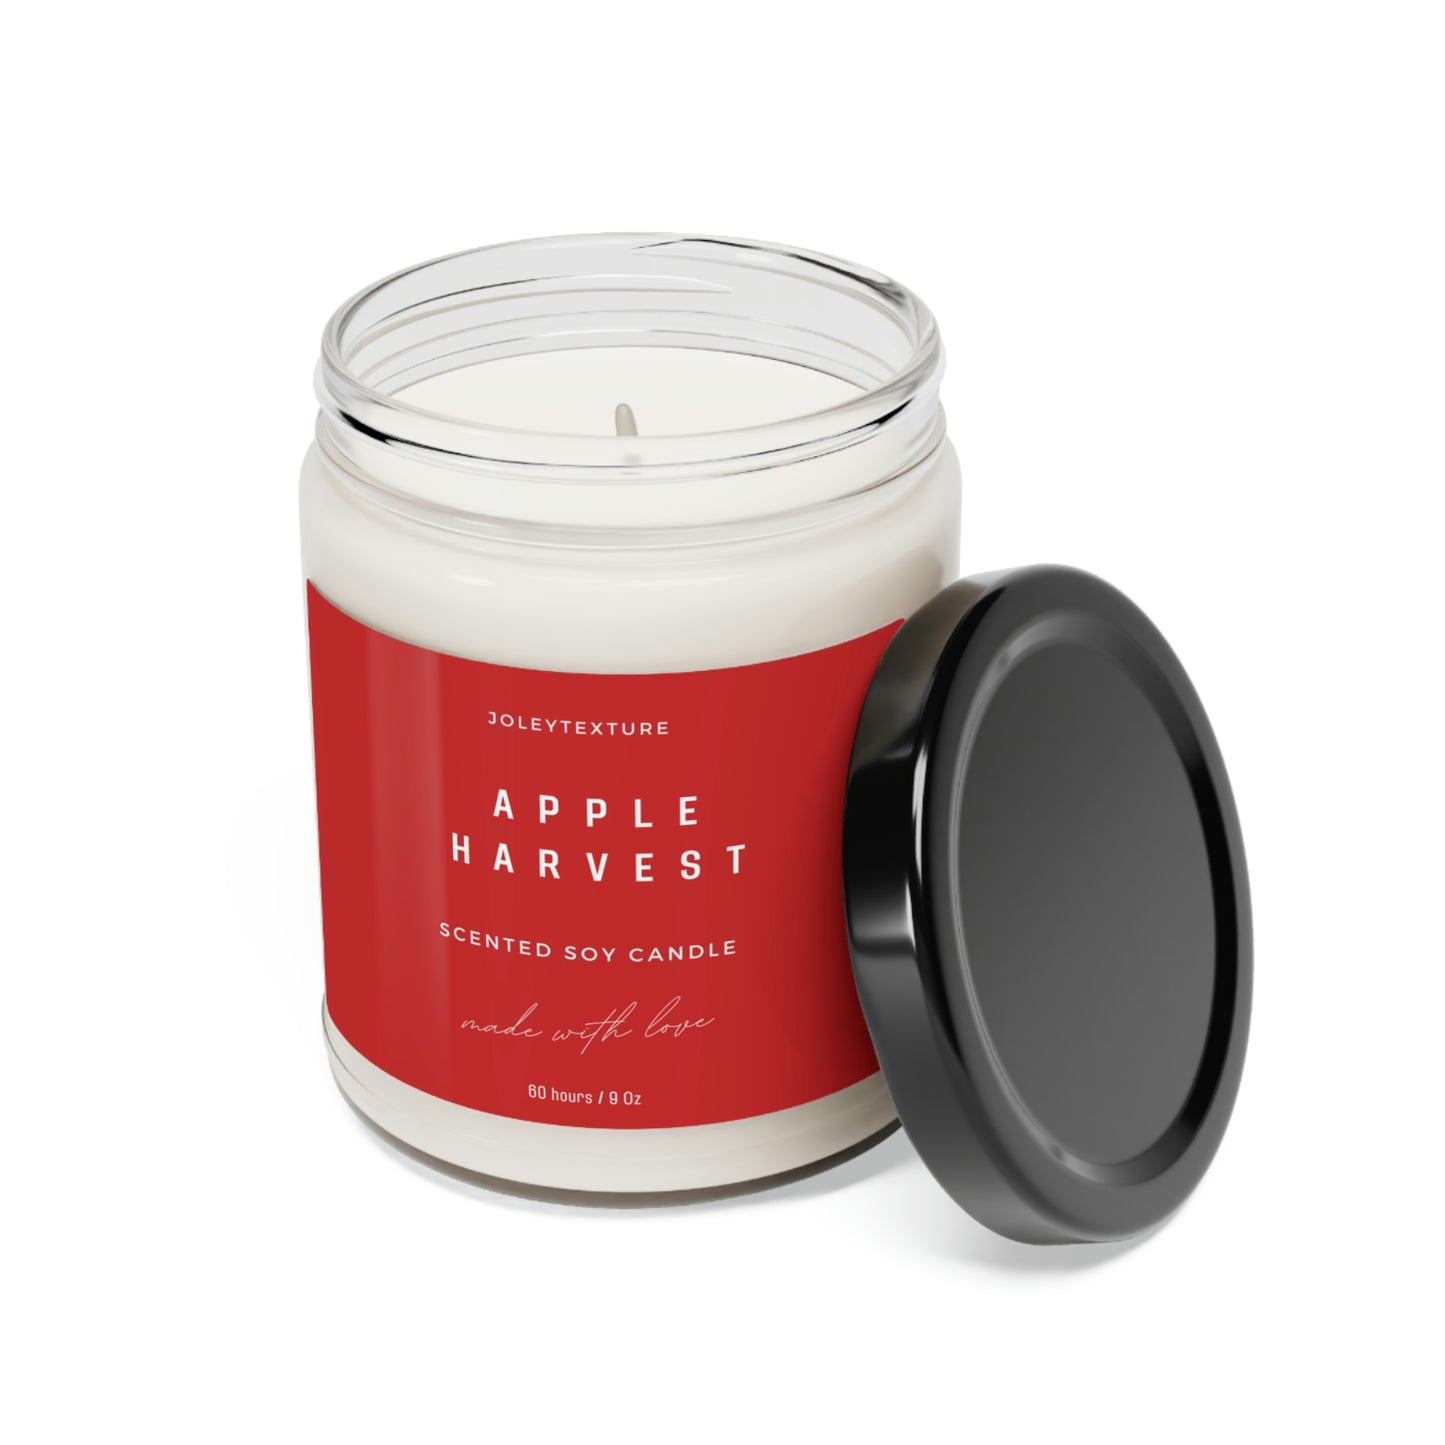 Apple Harvest Scented Soy Candle, 9oz